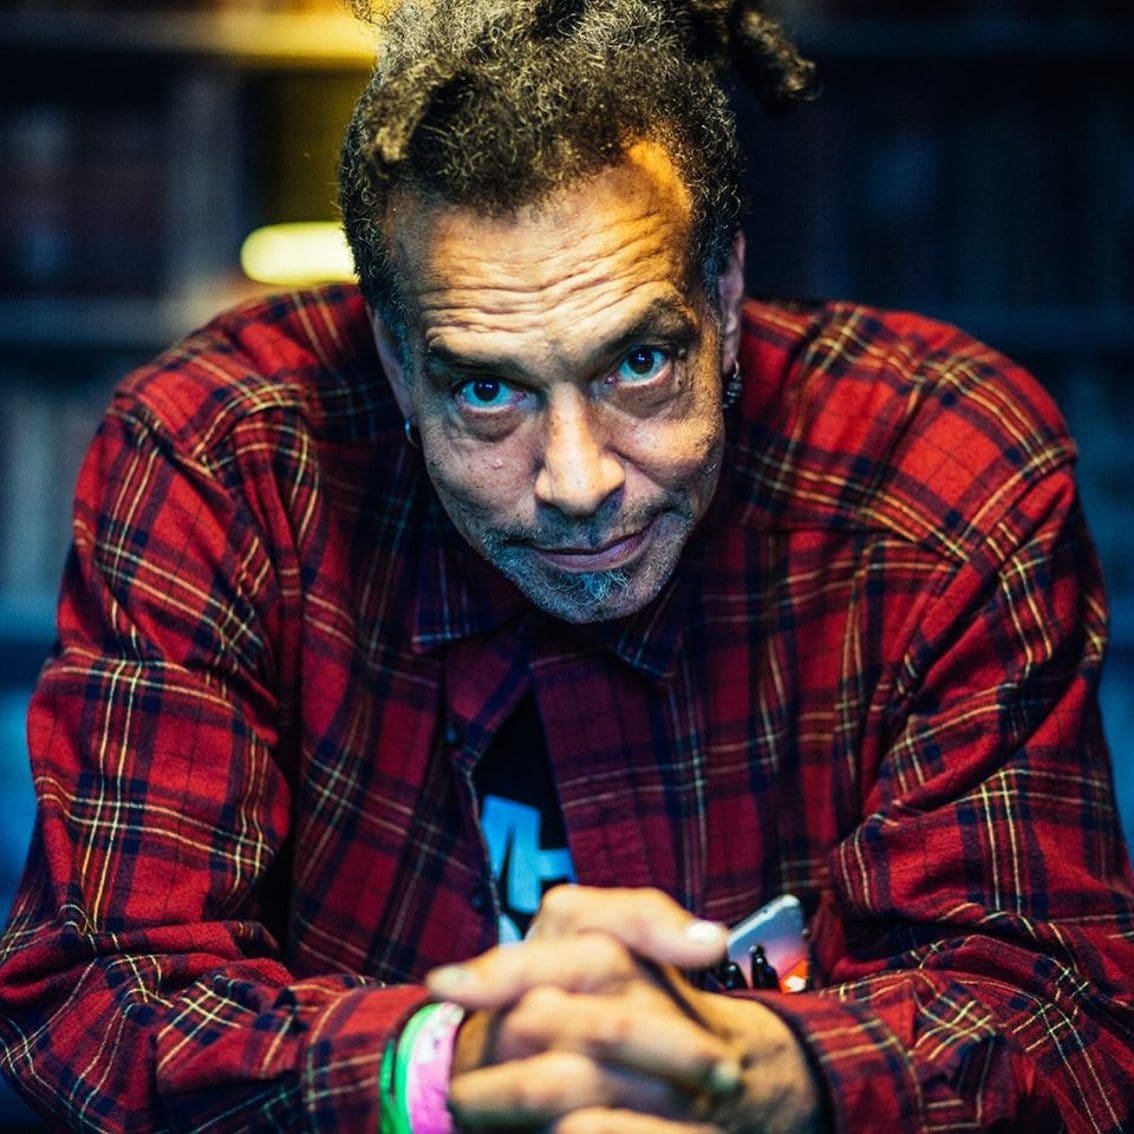 Chuck Mosley, former singer of Faith No More, dead at 57